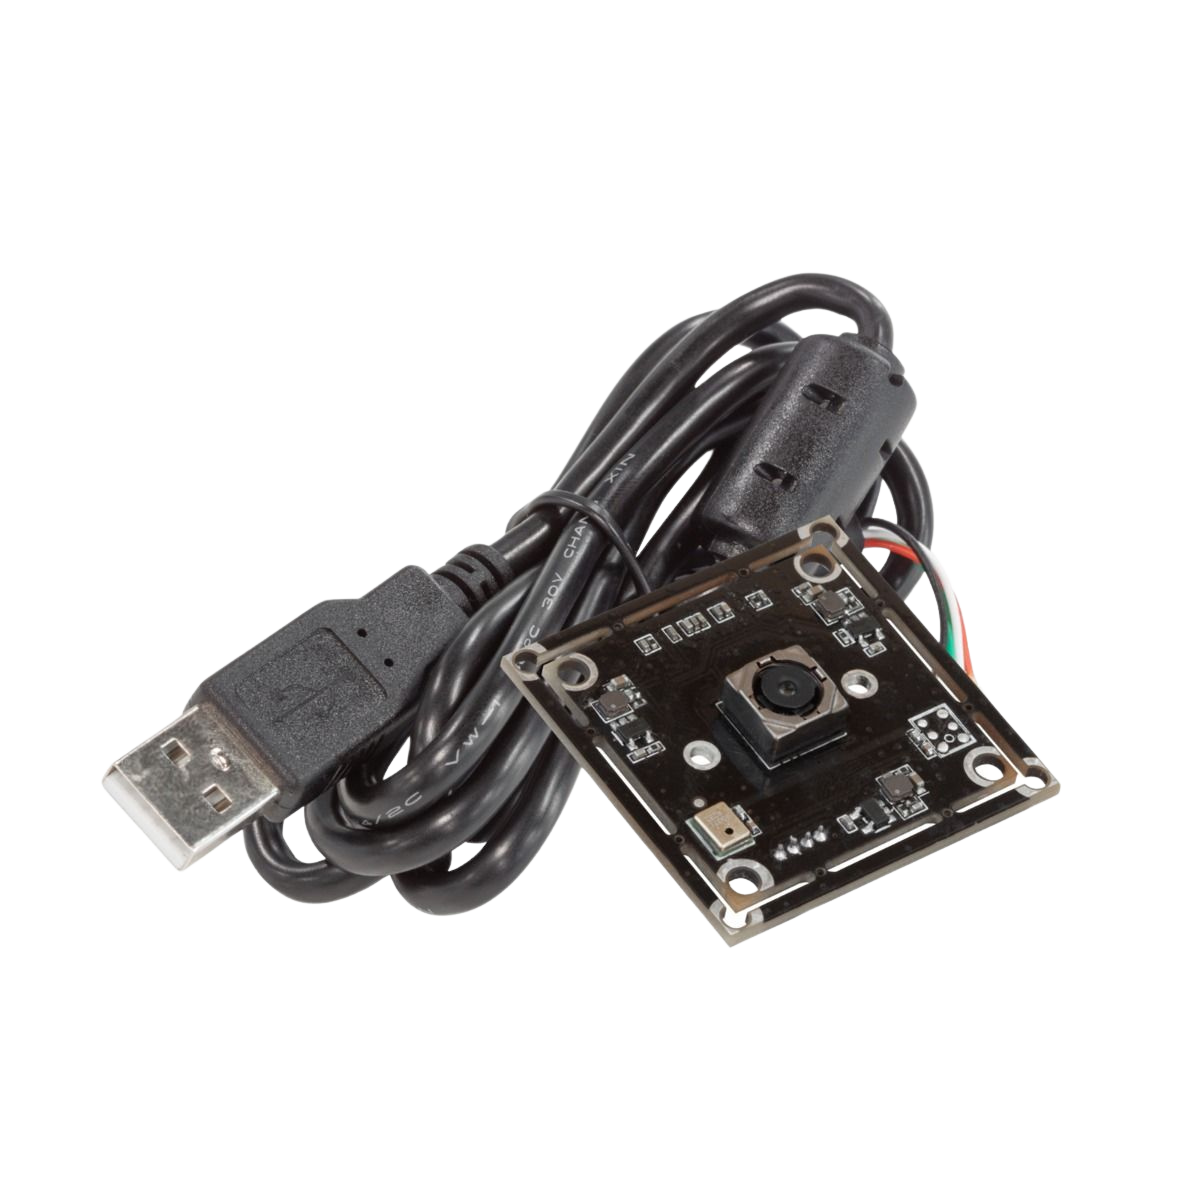 Arducam 8MP IMX179 AF USB camera module with USB cable